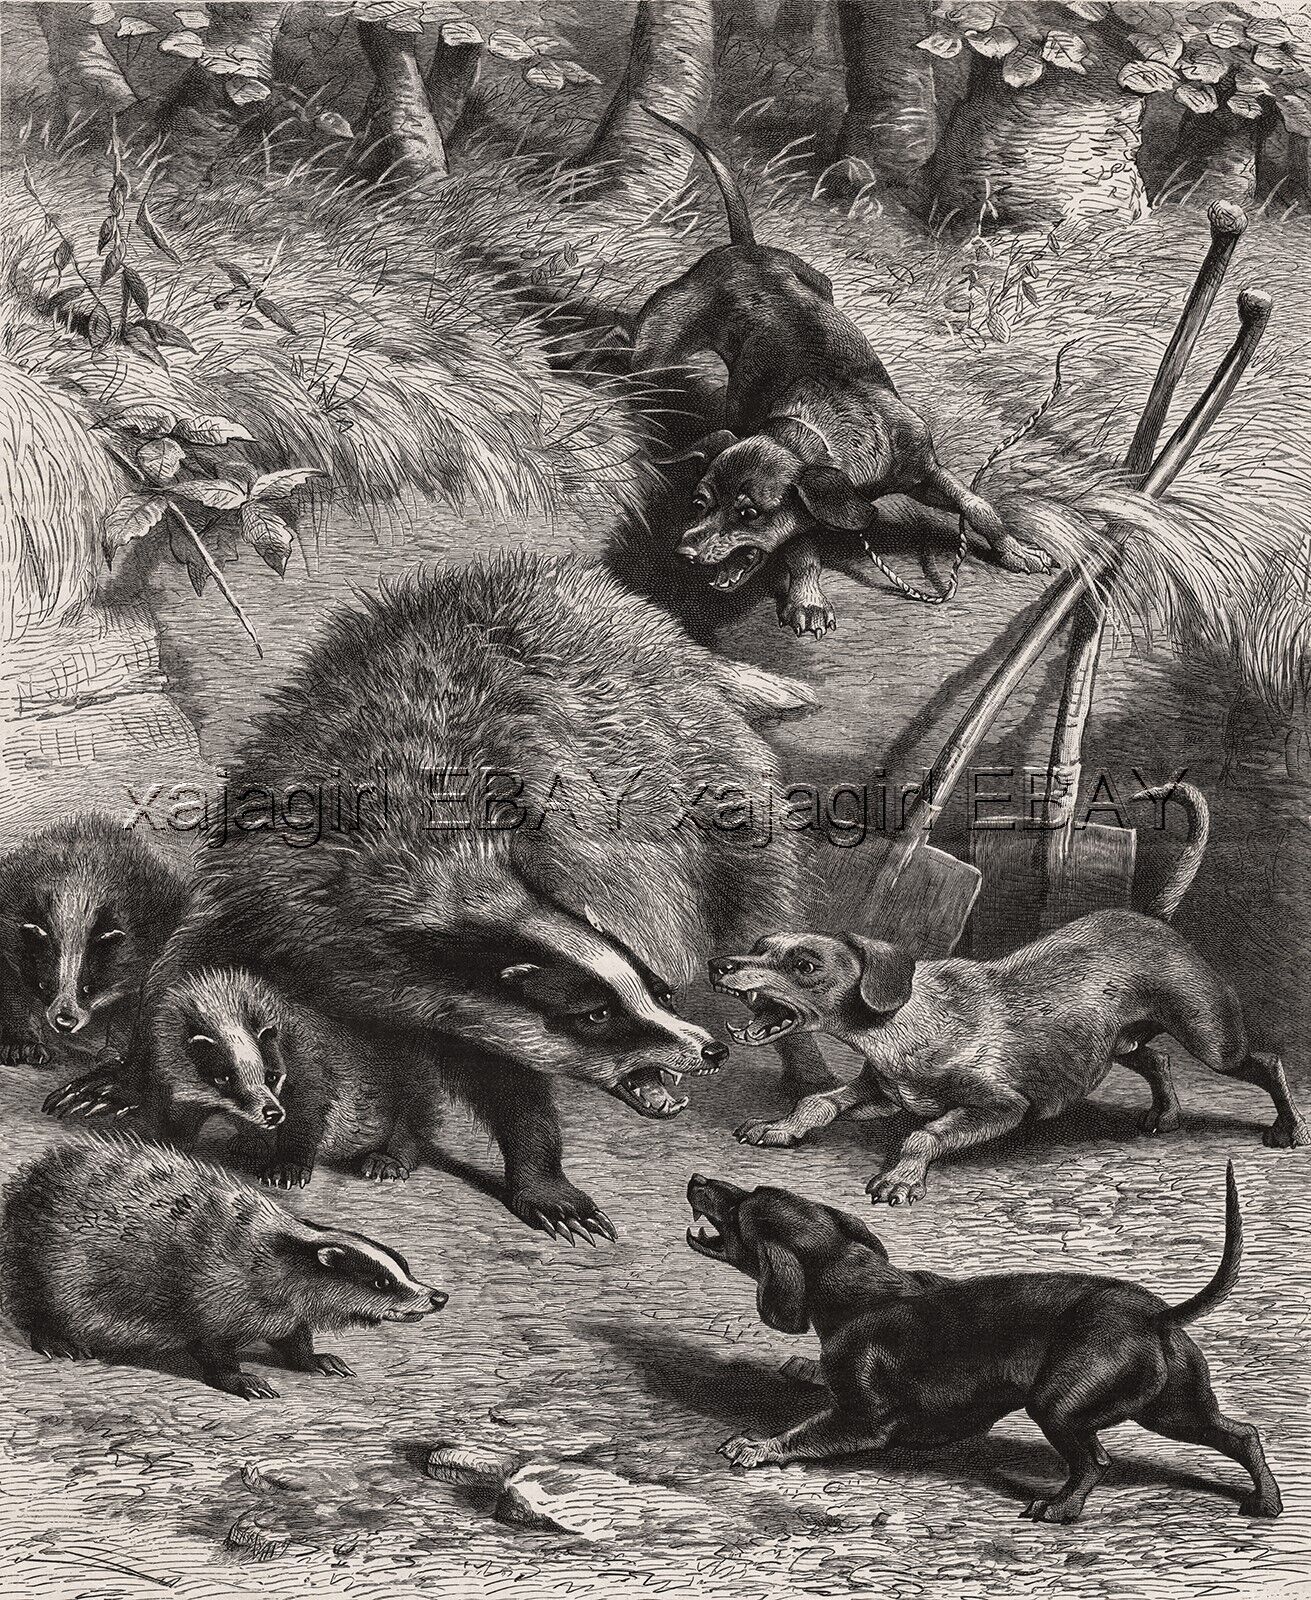 Dog Dachshund Dogs Fight Badger Mother & Babies, Large 1880s Antique Print